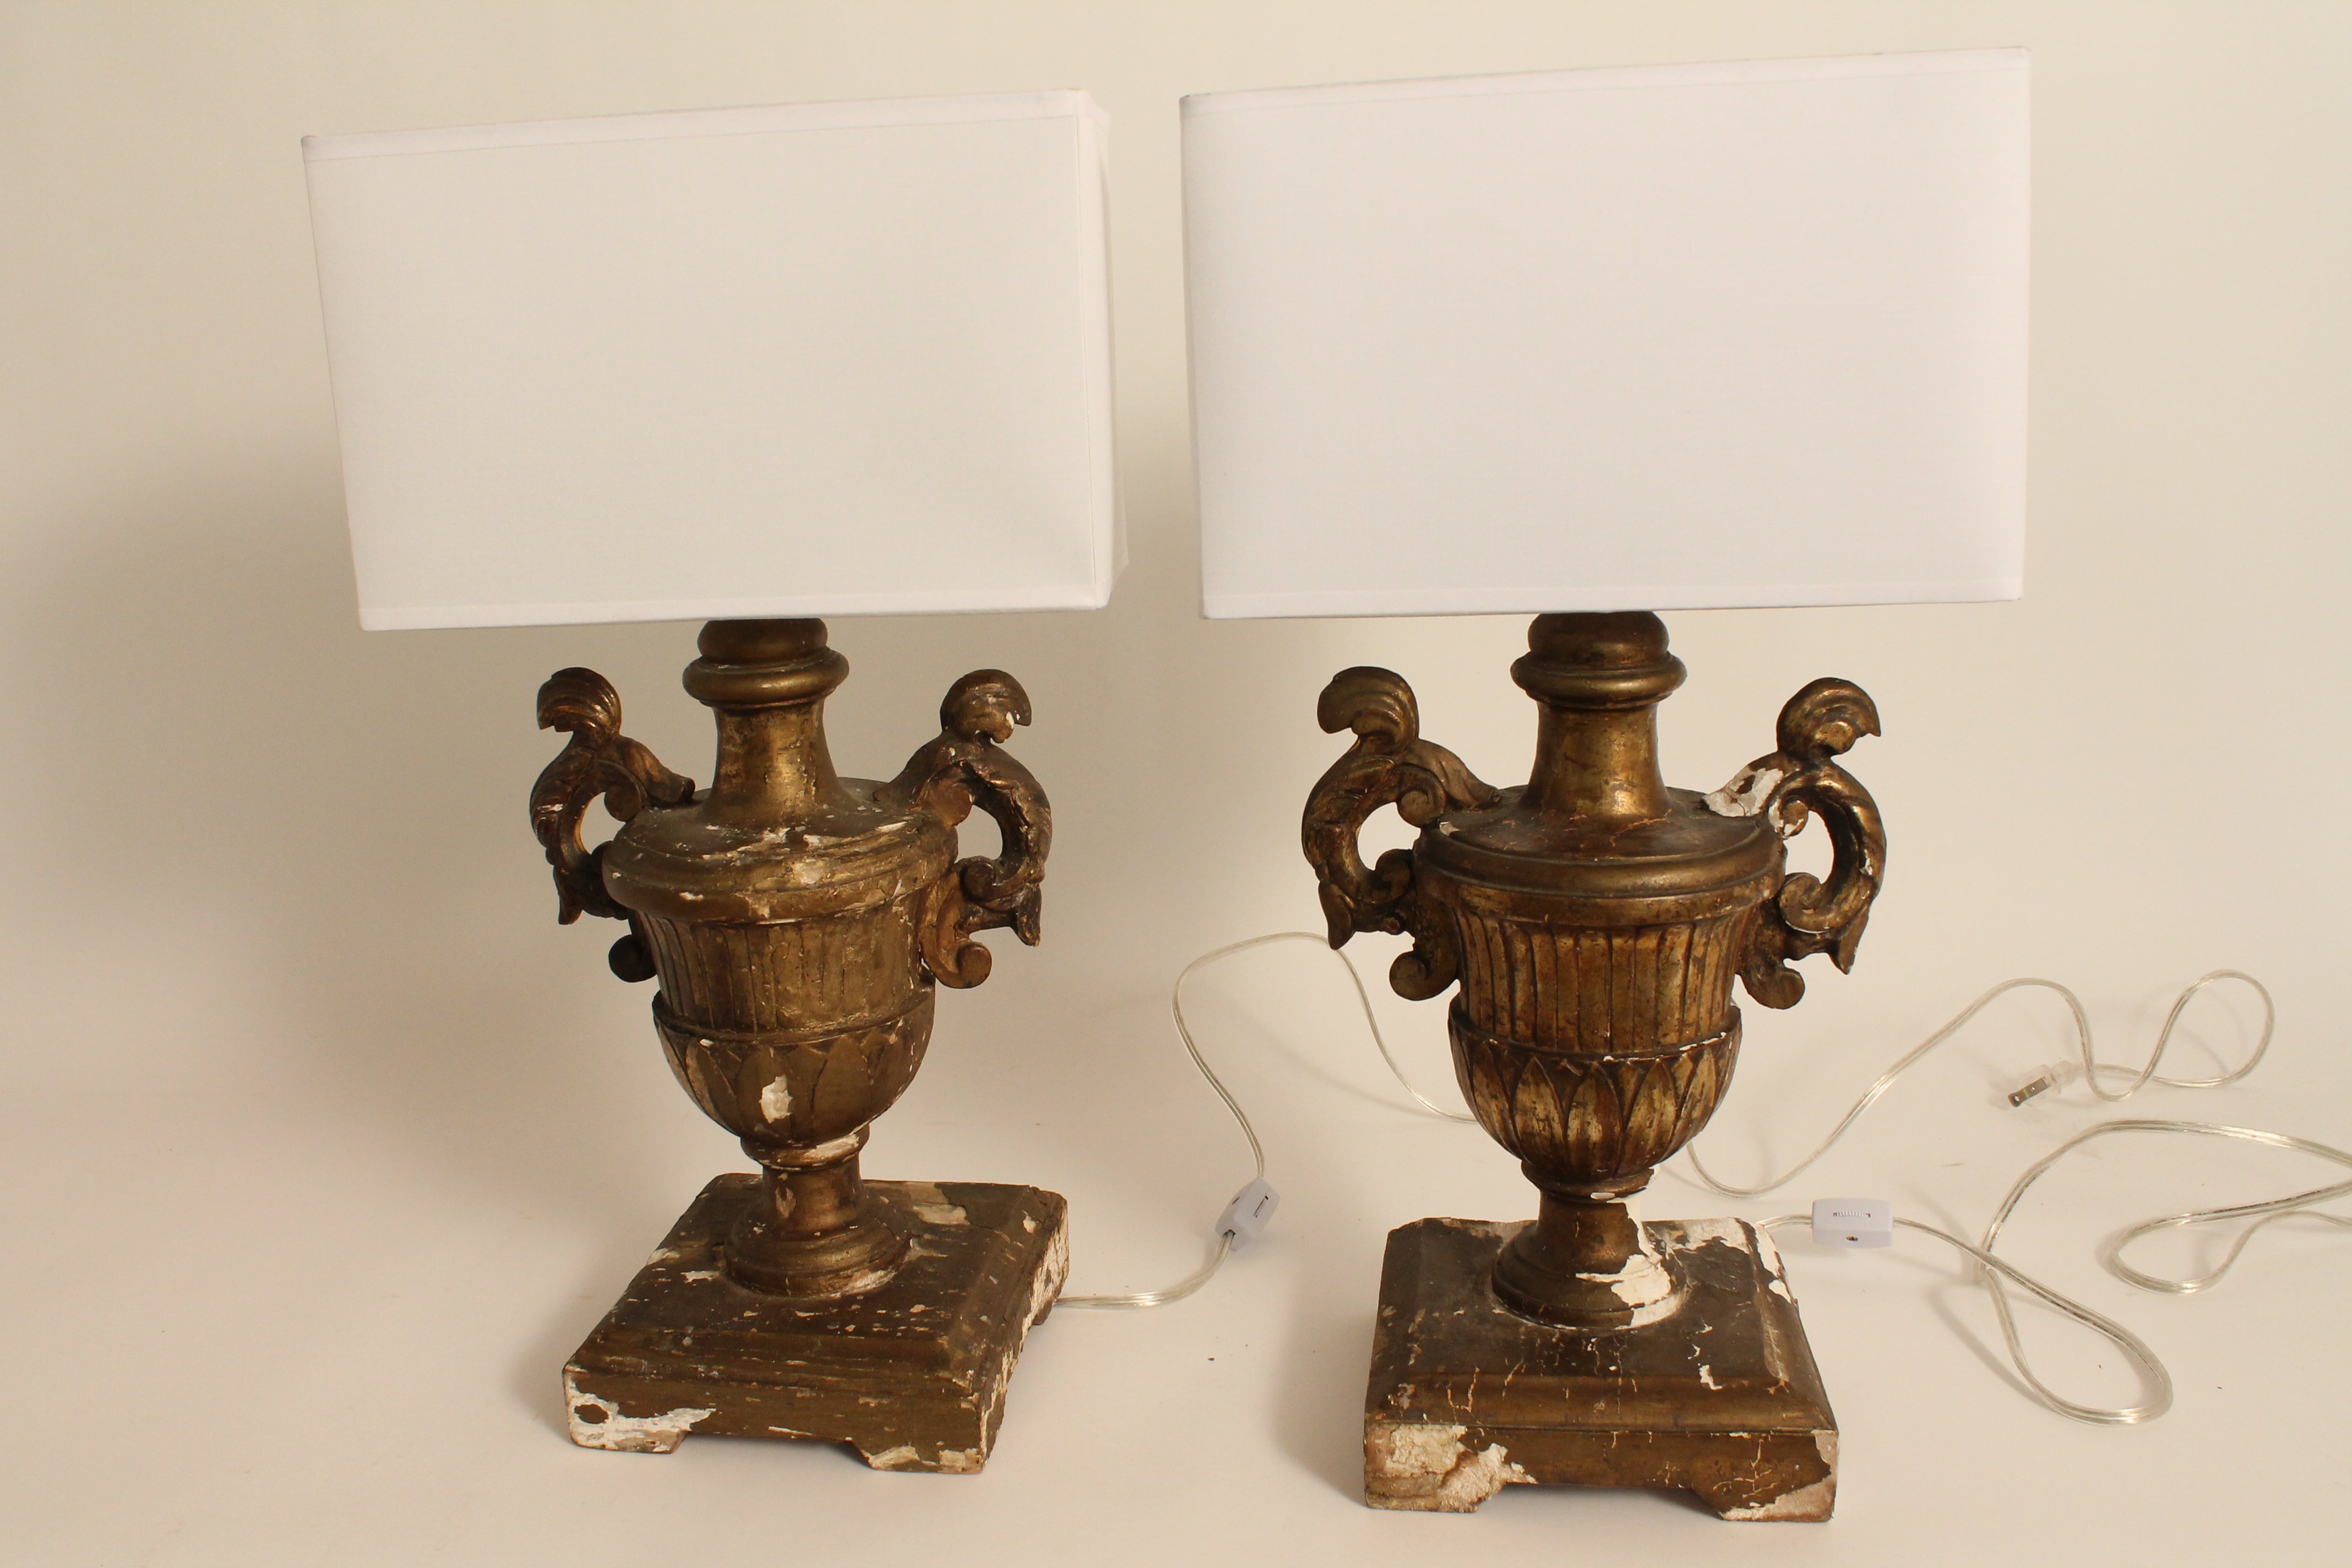 Pair of 19th Century Italian Carved and Gilt Wood Urn Form Lamps